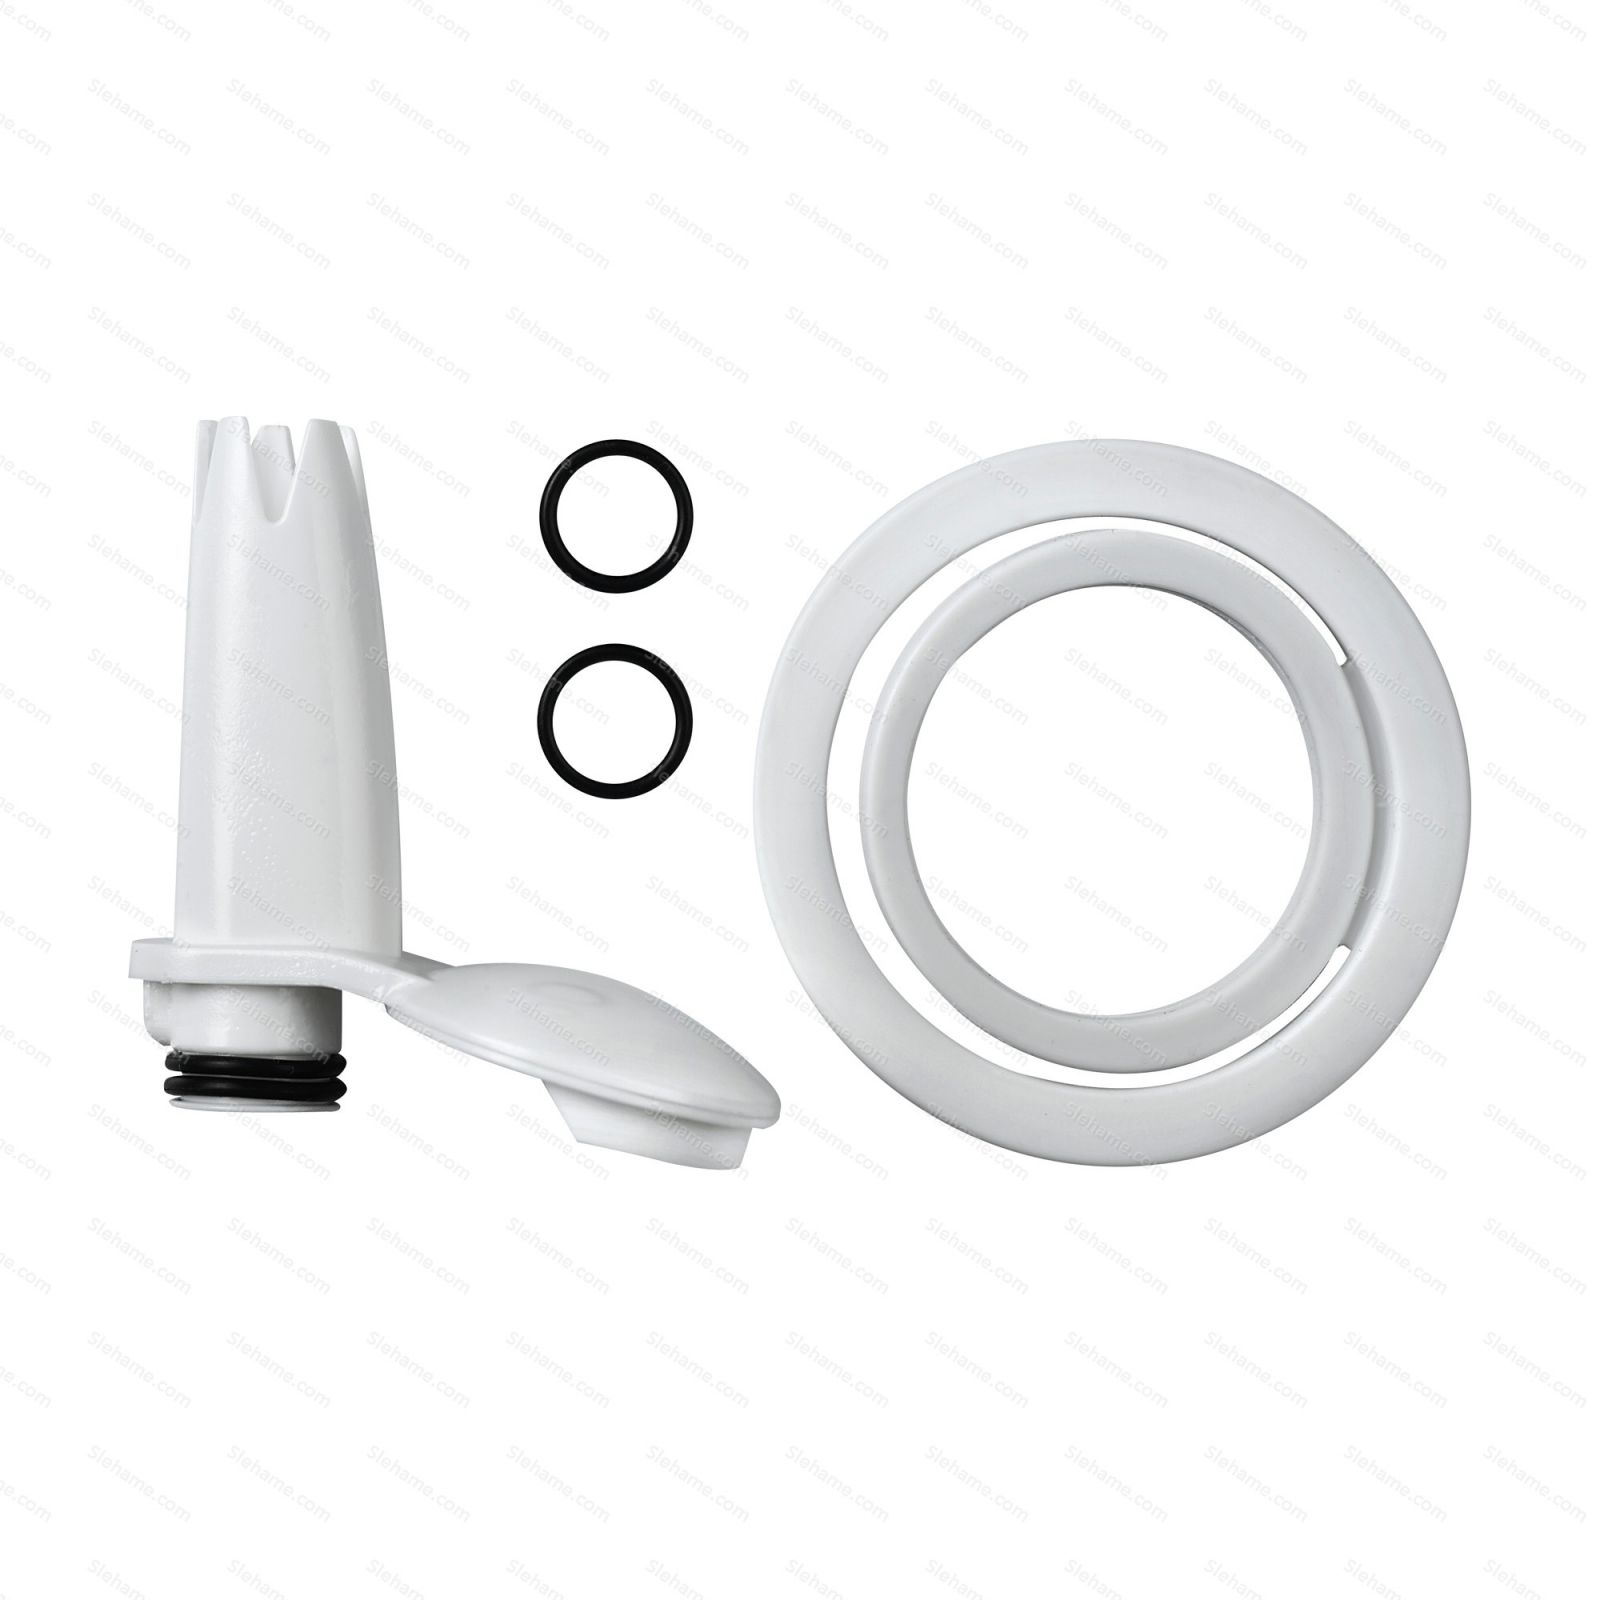 Spare parts set iSi EASY WHIP PLUS, white - package content